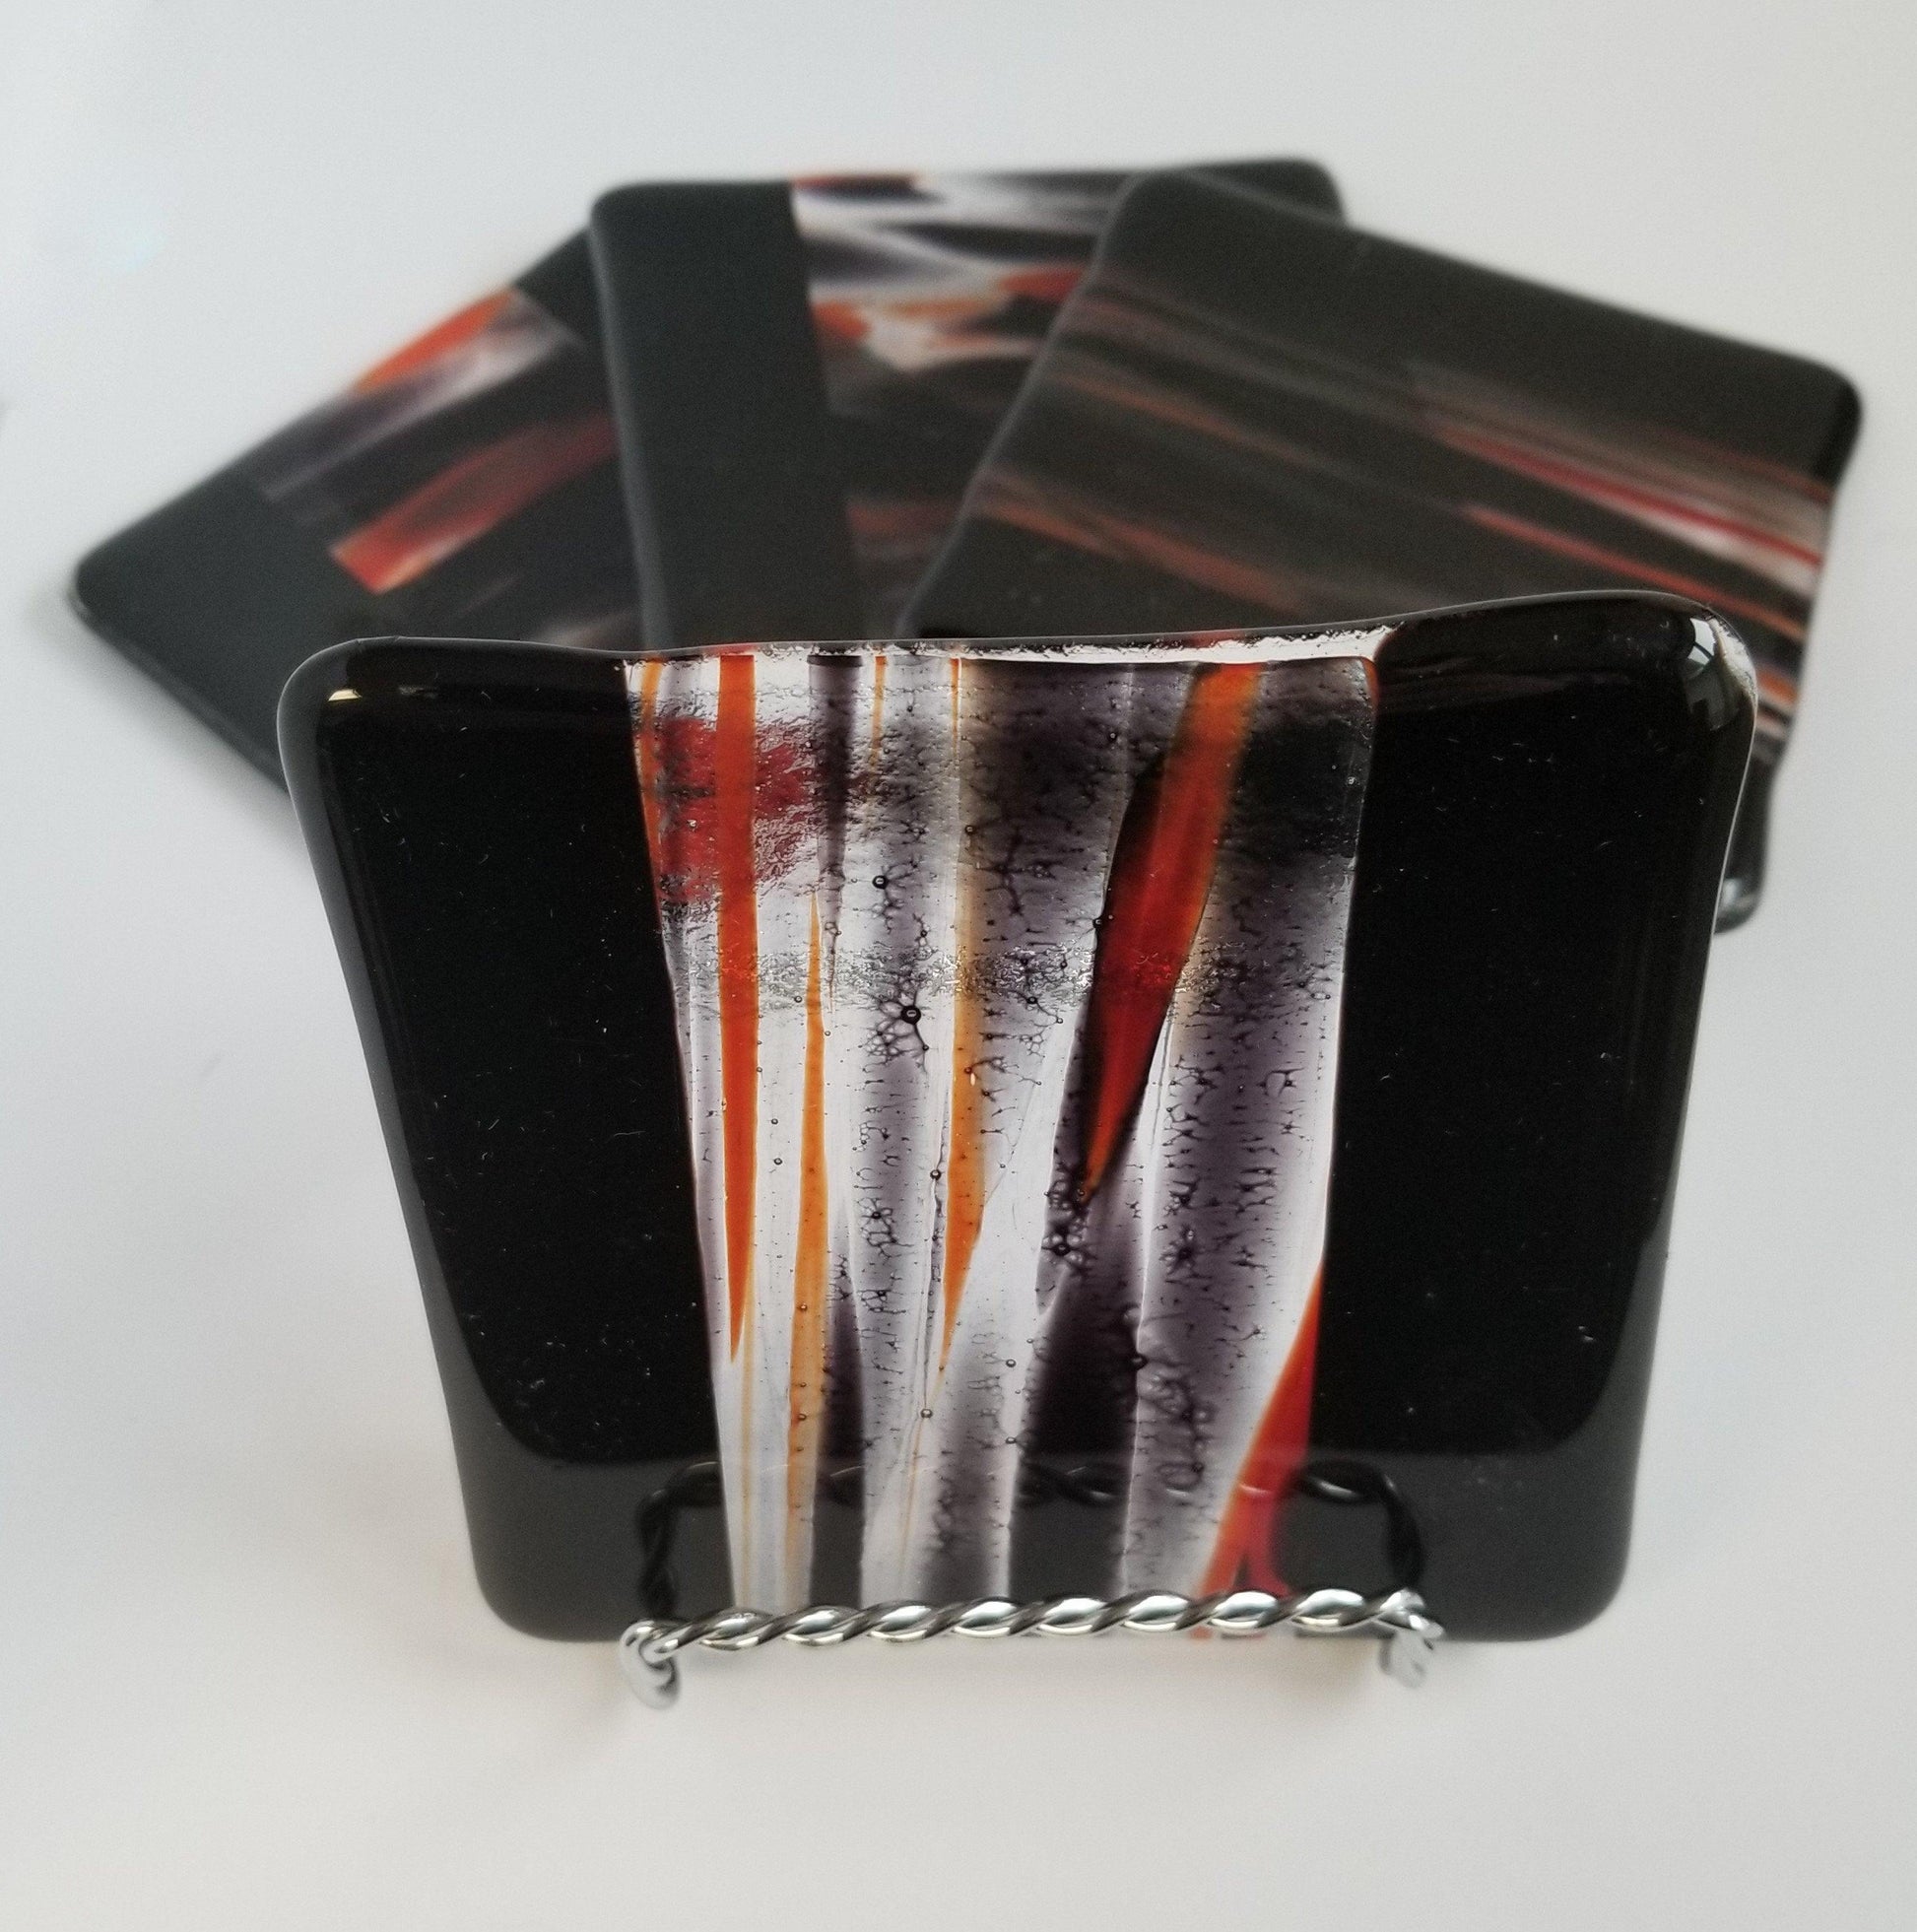 Black and red swirl fused glass coasters, set of 4. From Seeds Glassworks, seedsglassworks